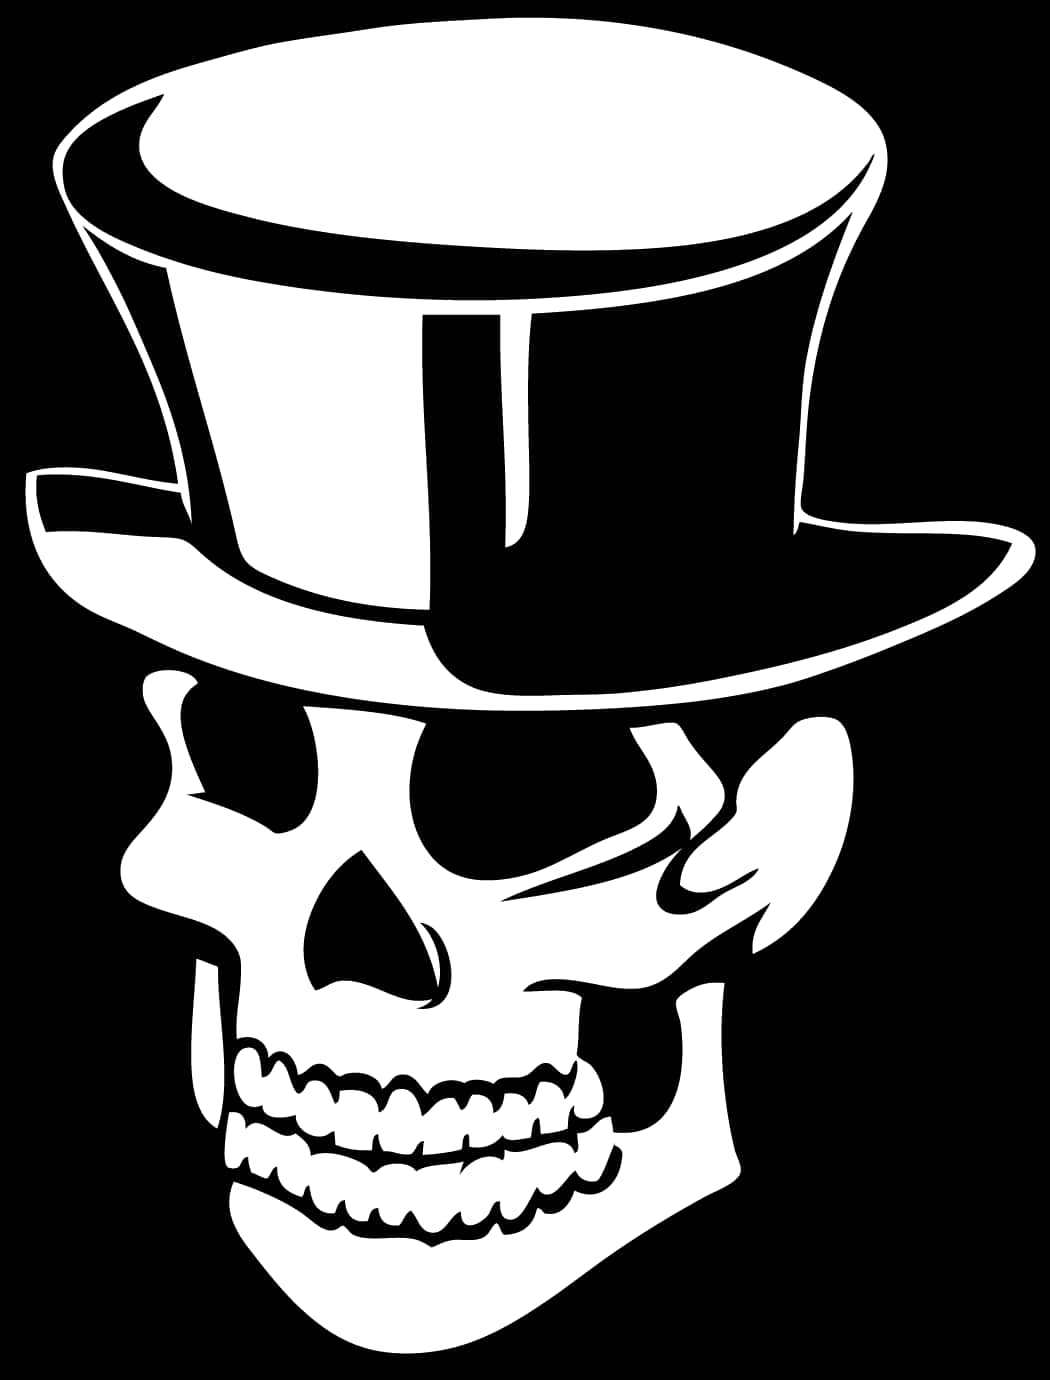 A Skull Wearing A Top Hat